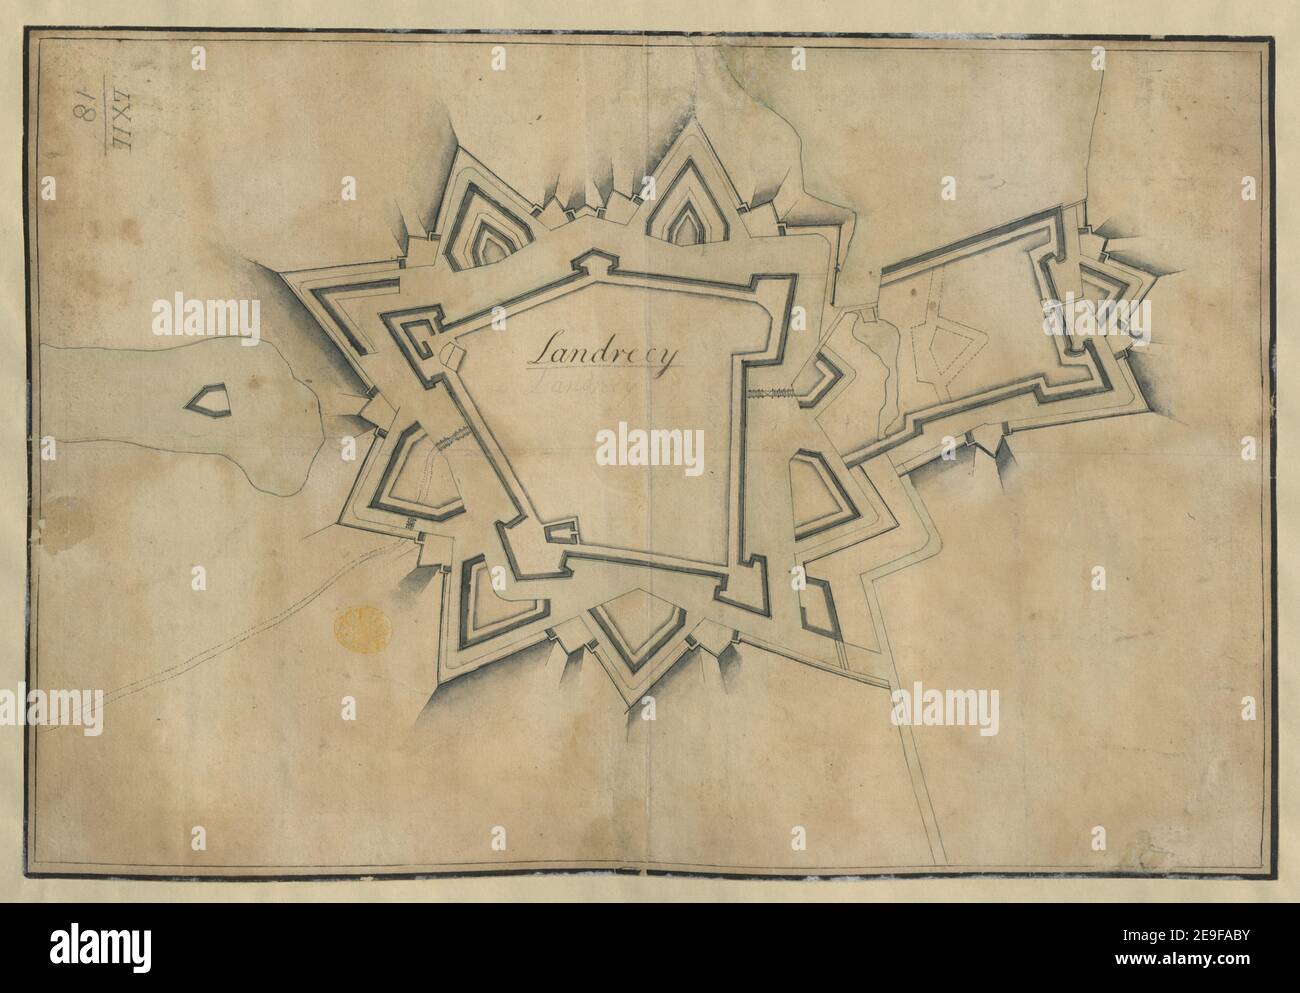 Landrecy. Map information:  Title: Landrecy. 62.18. Place of publication: [about 1660?]  Item type: 1 map Medium: ink and wash Dimensions: 29.7 x 44 cm  Former owner: George III, King of Great Britain, 1738-1820 Stock Photo